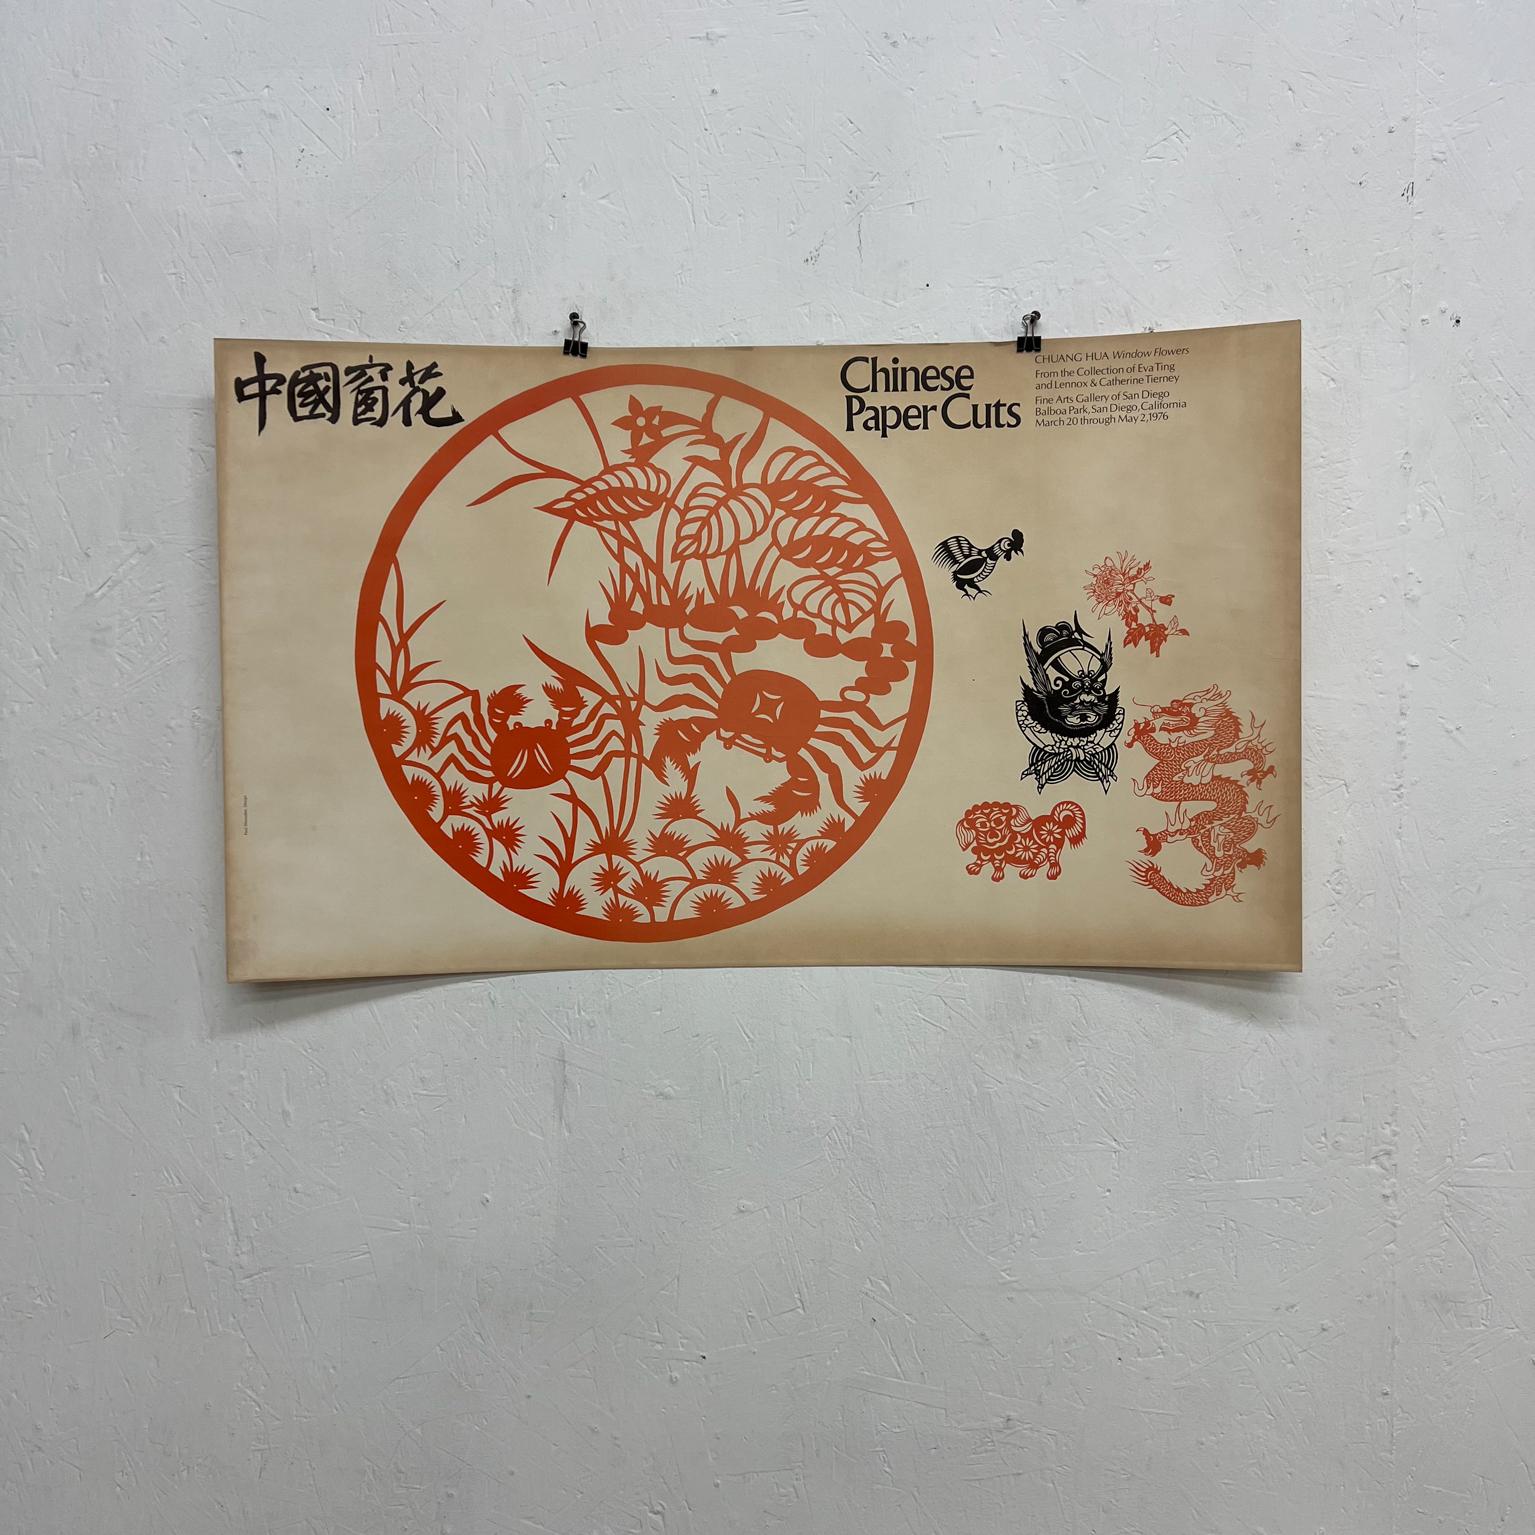 1970s vintage pretty Chinese papercutting art window flower Chuang hua
Measures: 34 x 20
Original unrestored vintage condition
See images provided please.